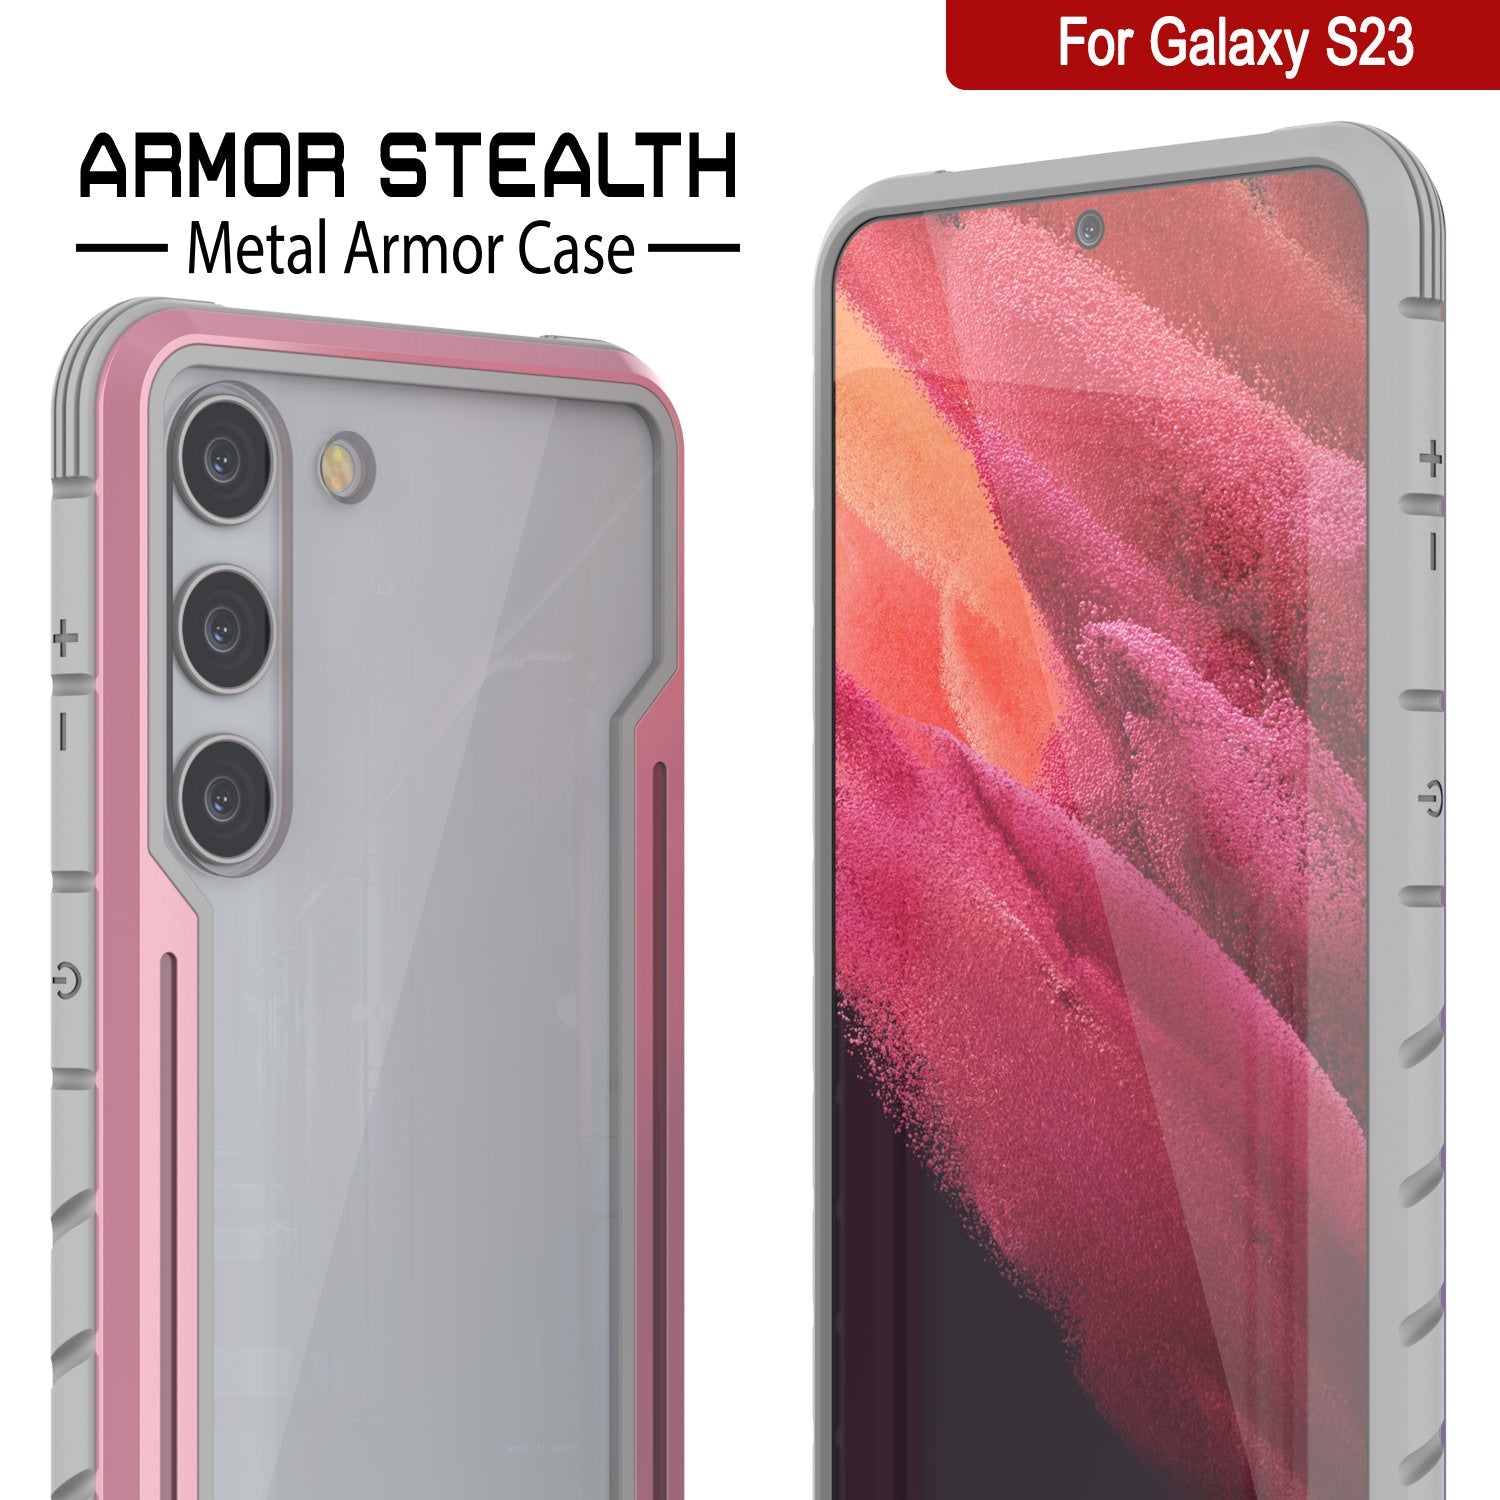 Punkcase S23 Armor Stealth Case Protective Military Grade Multilayer Cover [Rose-Gold]